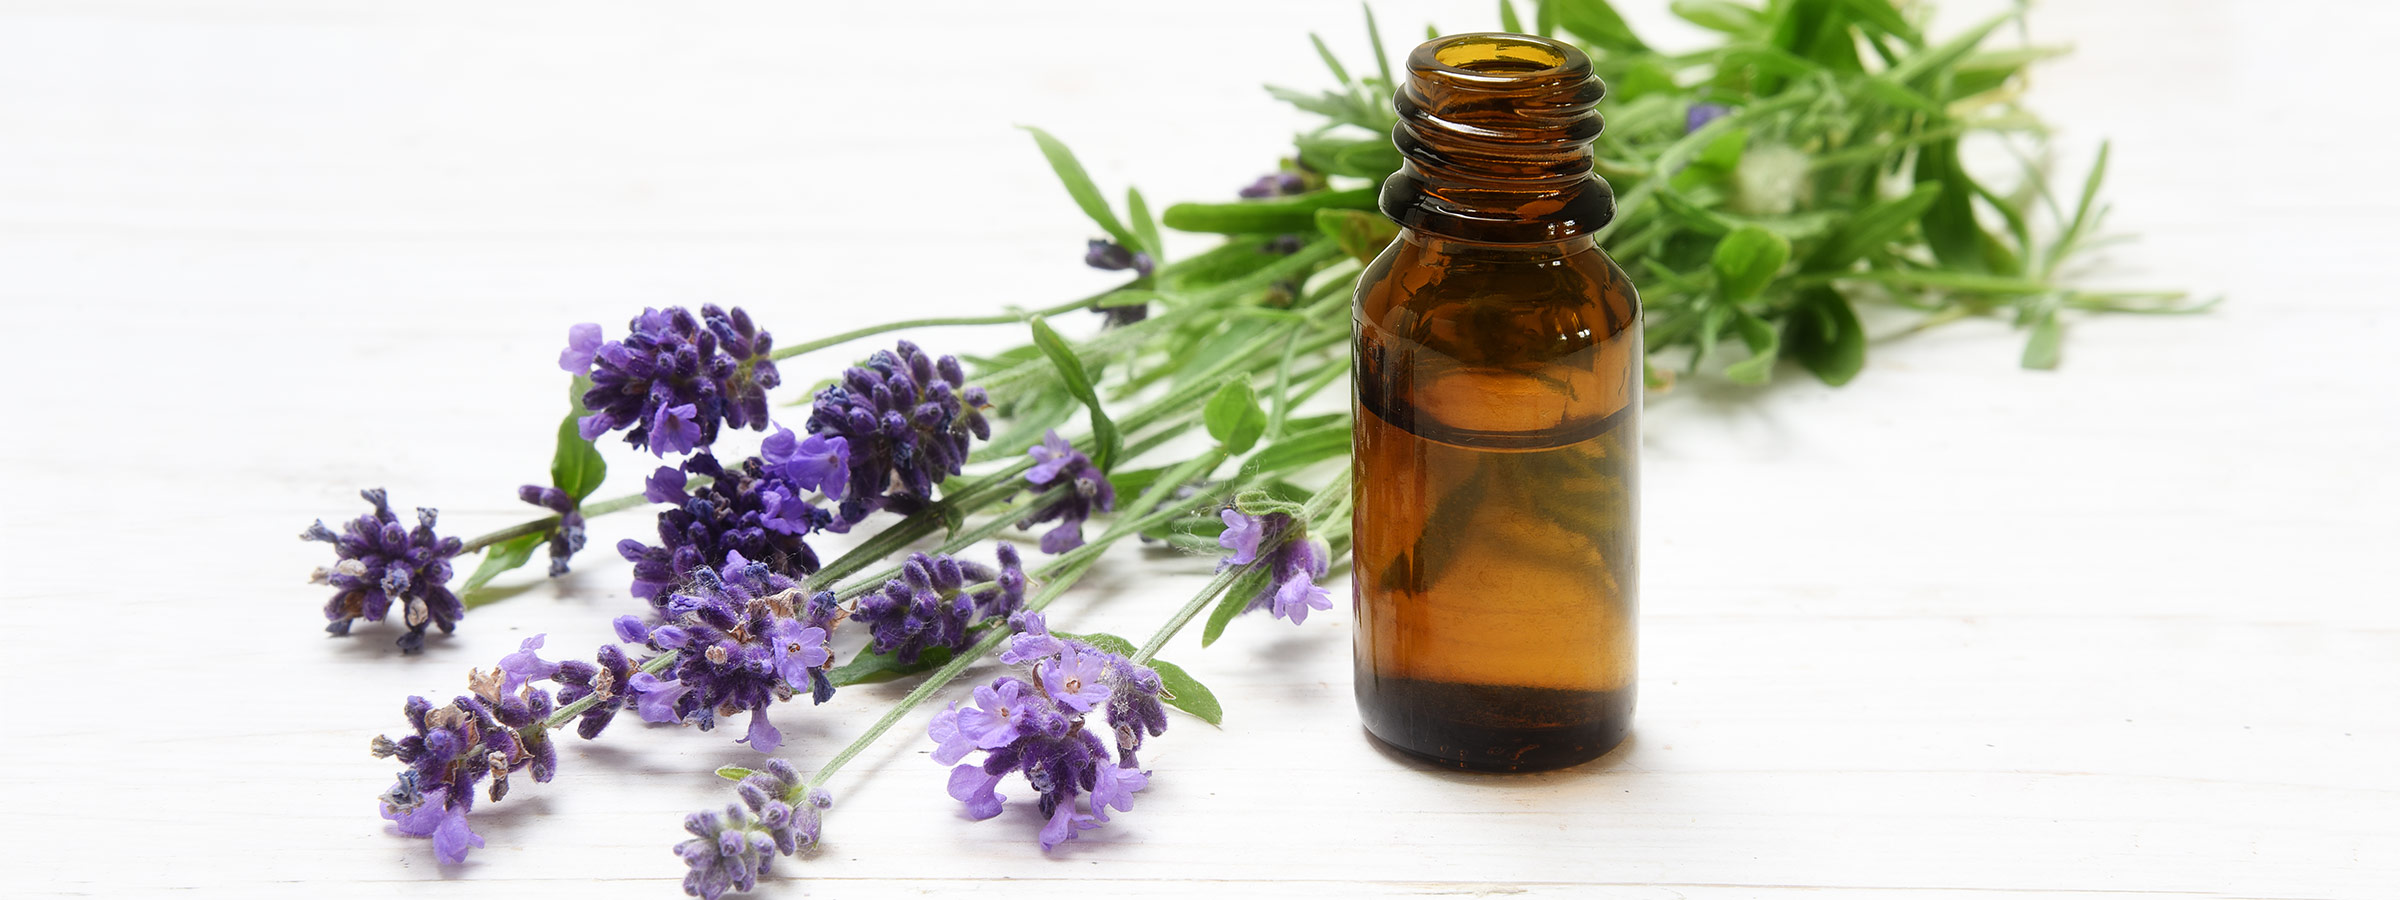 NOW Foods Essential Oil Variety